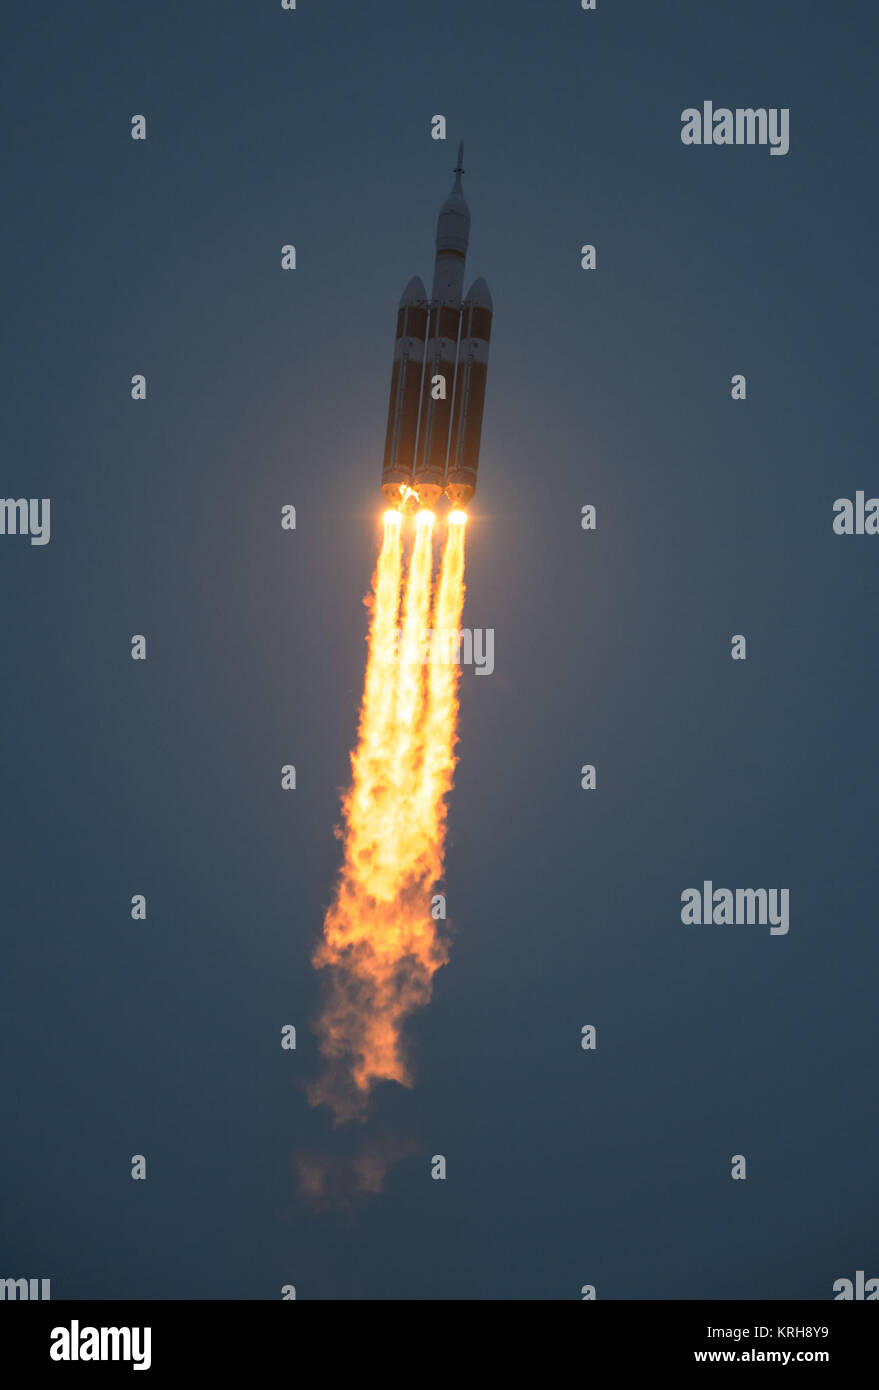 The United Launch Alliance Delta IV Heavy rocket with NASA’s Orion spacecraft mounted atop, lifts off from Cape Canaveral Air Force Station's Space Launch Complex 37 at at 7:05 a.m. EST, Friday, Dec. 5, 2014, in Florida. The Orion spacecraft will orbit Earth twice, reaching an altitude of approximately 3,600 miles above Earth before landing in the Pacific Ocean. No one is aboard Orion for this flight test, but the spacecraft is designed to allow us to journey to destinations never before visited by humans, including an asteroid and Mars. Photo credit: (NASA/Bill Ingalls) Launching of EFT-1 Stock Photo